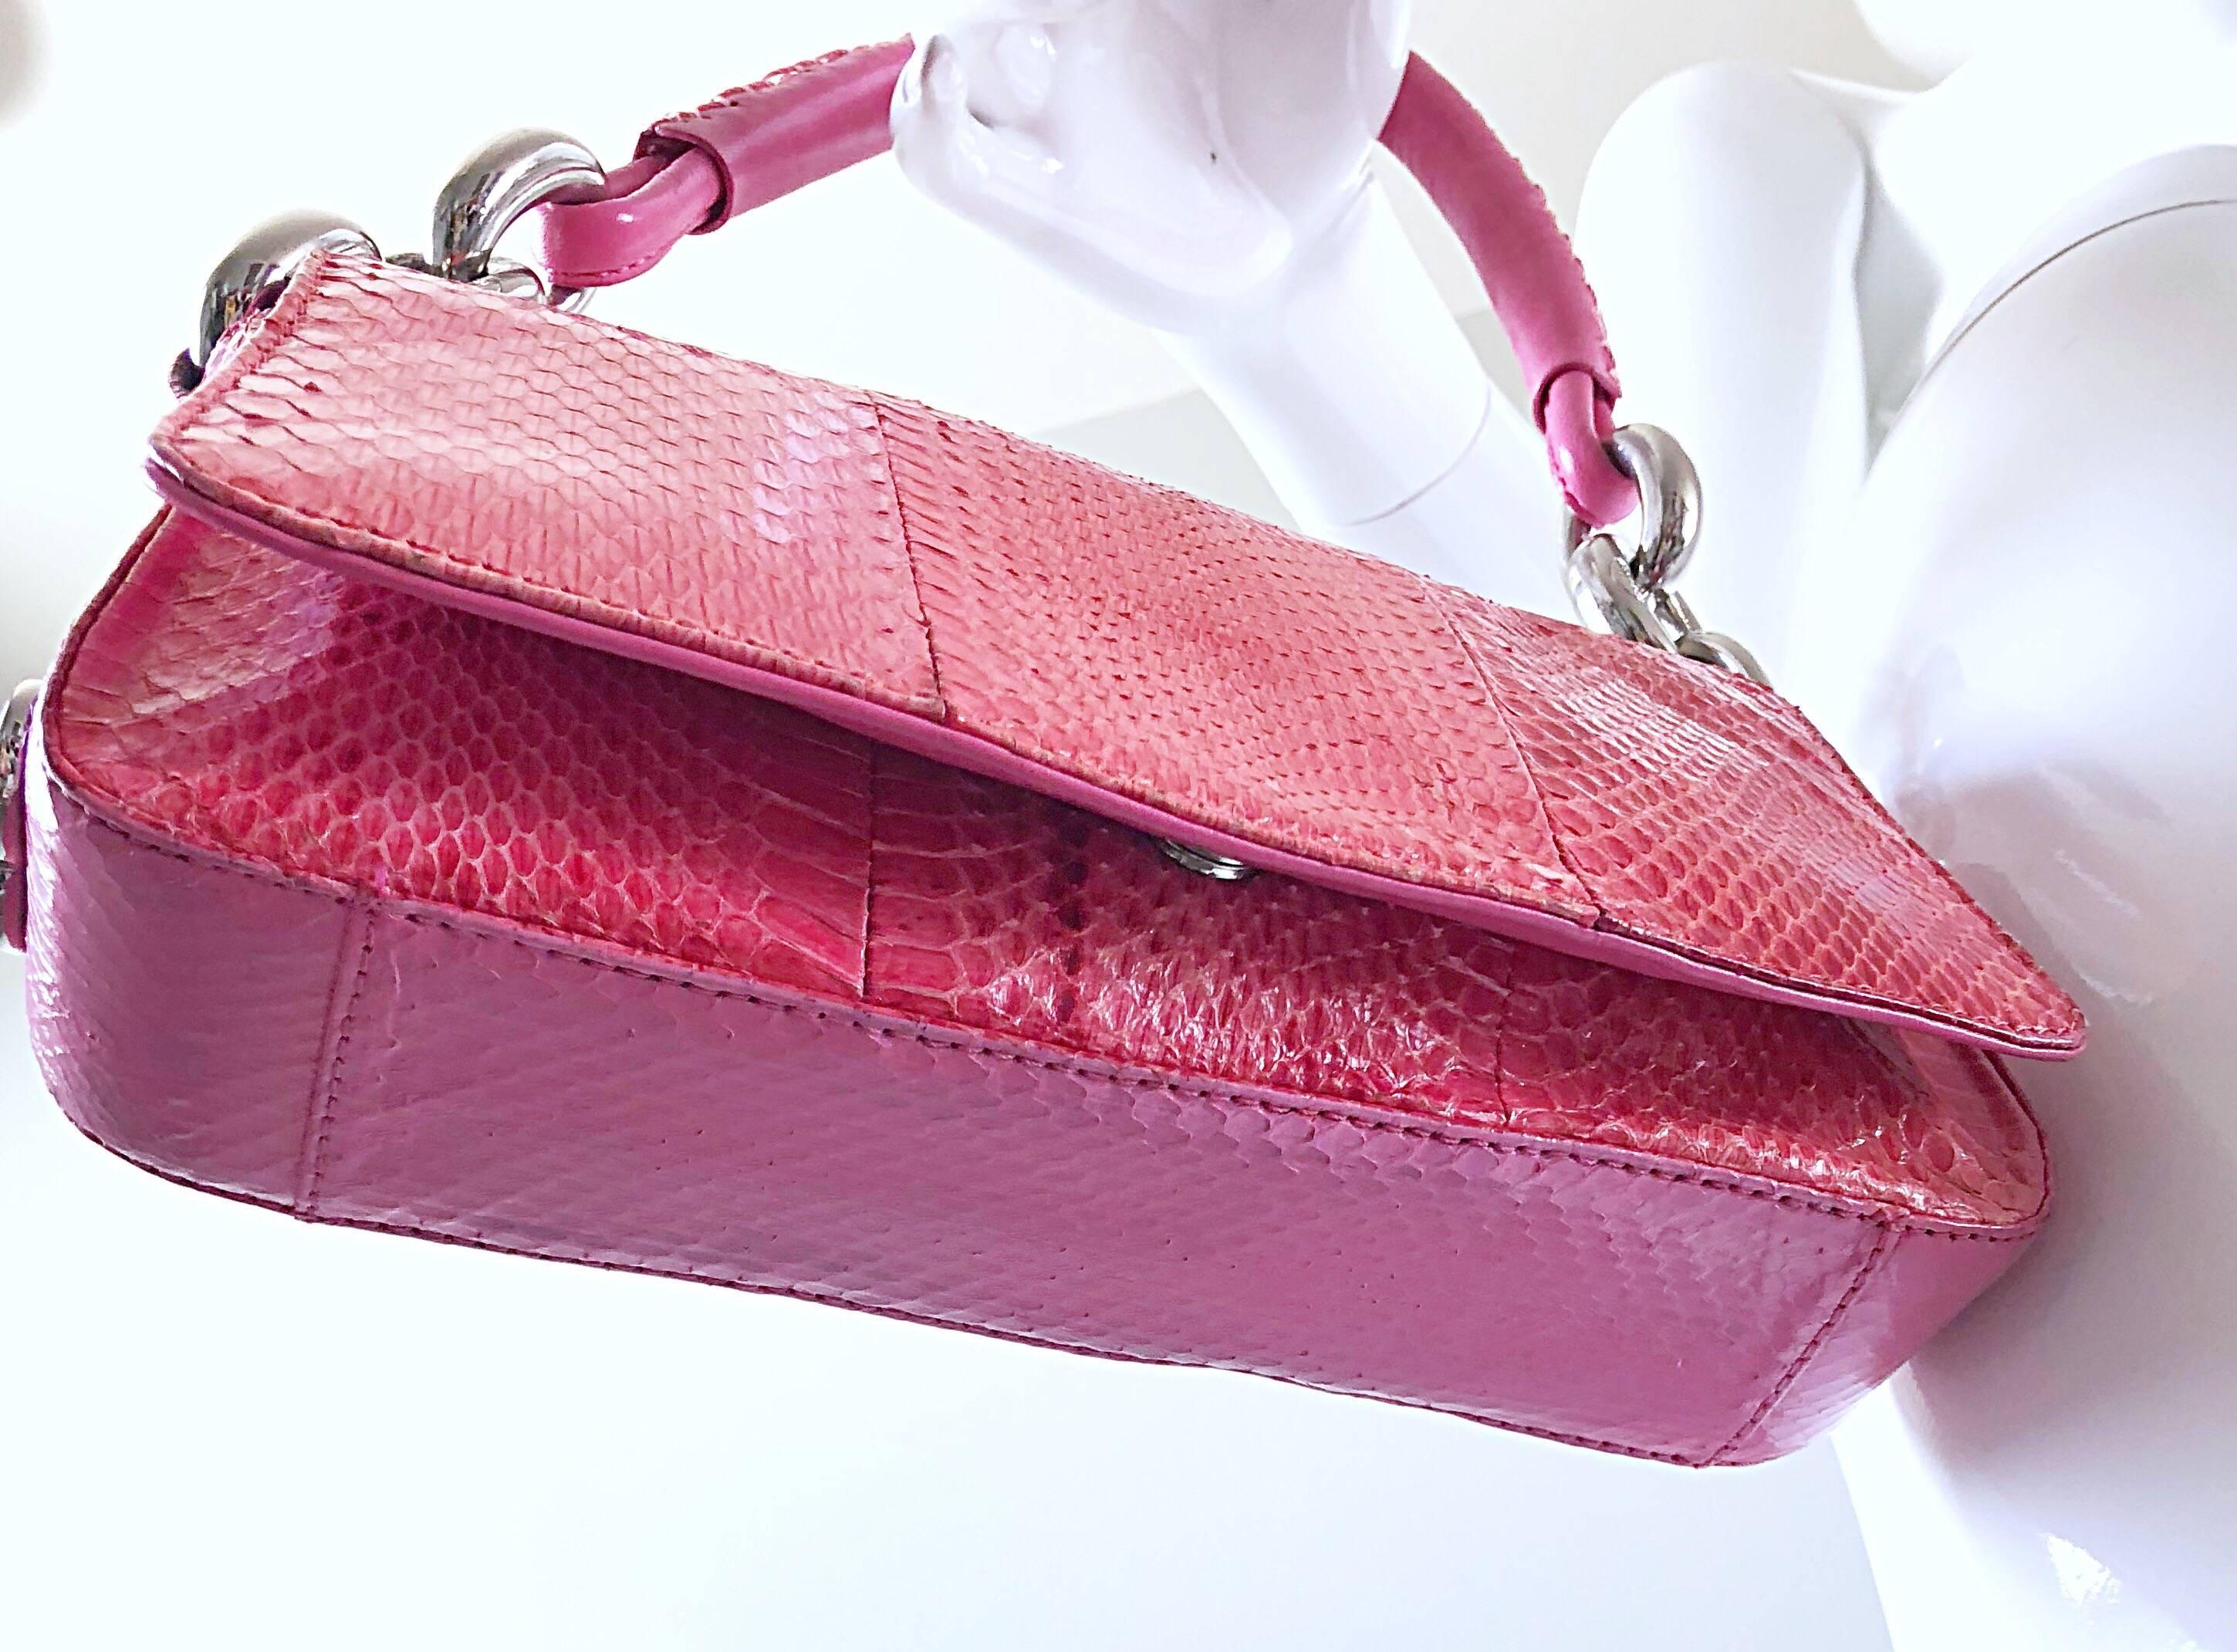 Escada 2000s Pink Python Snake Skin Silver Link Evening Shoulder Bag Purse In Excellent Condition For Sale In San Diego, CA